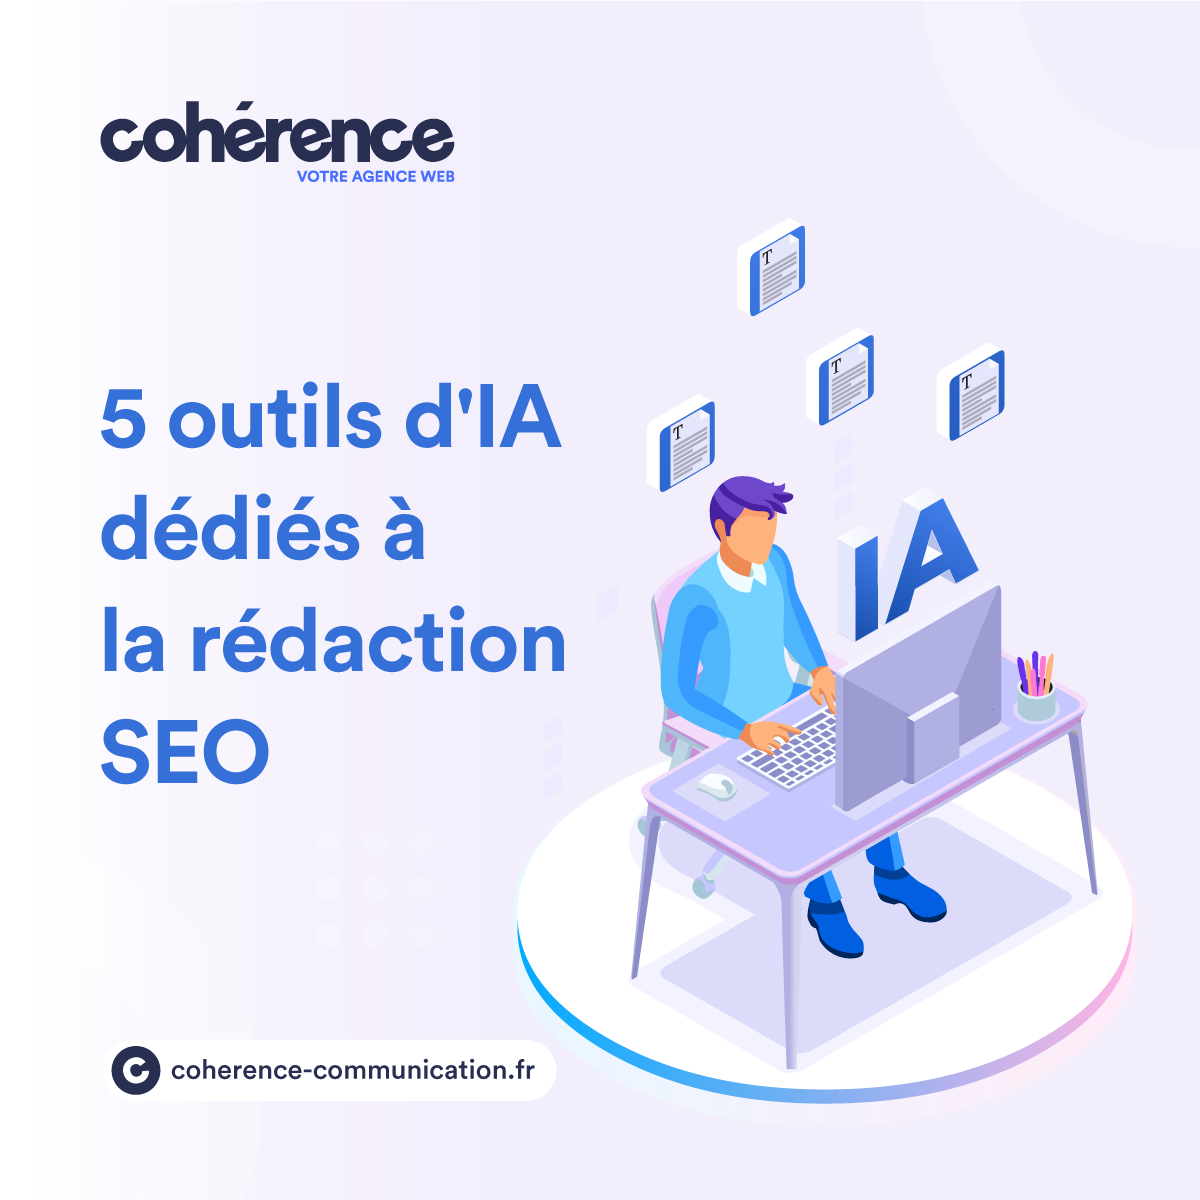 Coherence Agence Digitale Redaction SEO